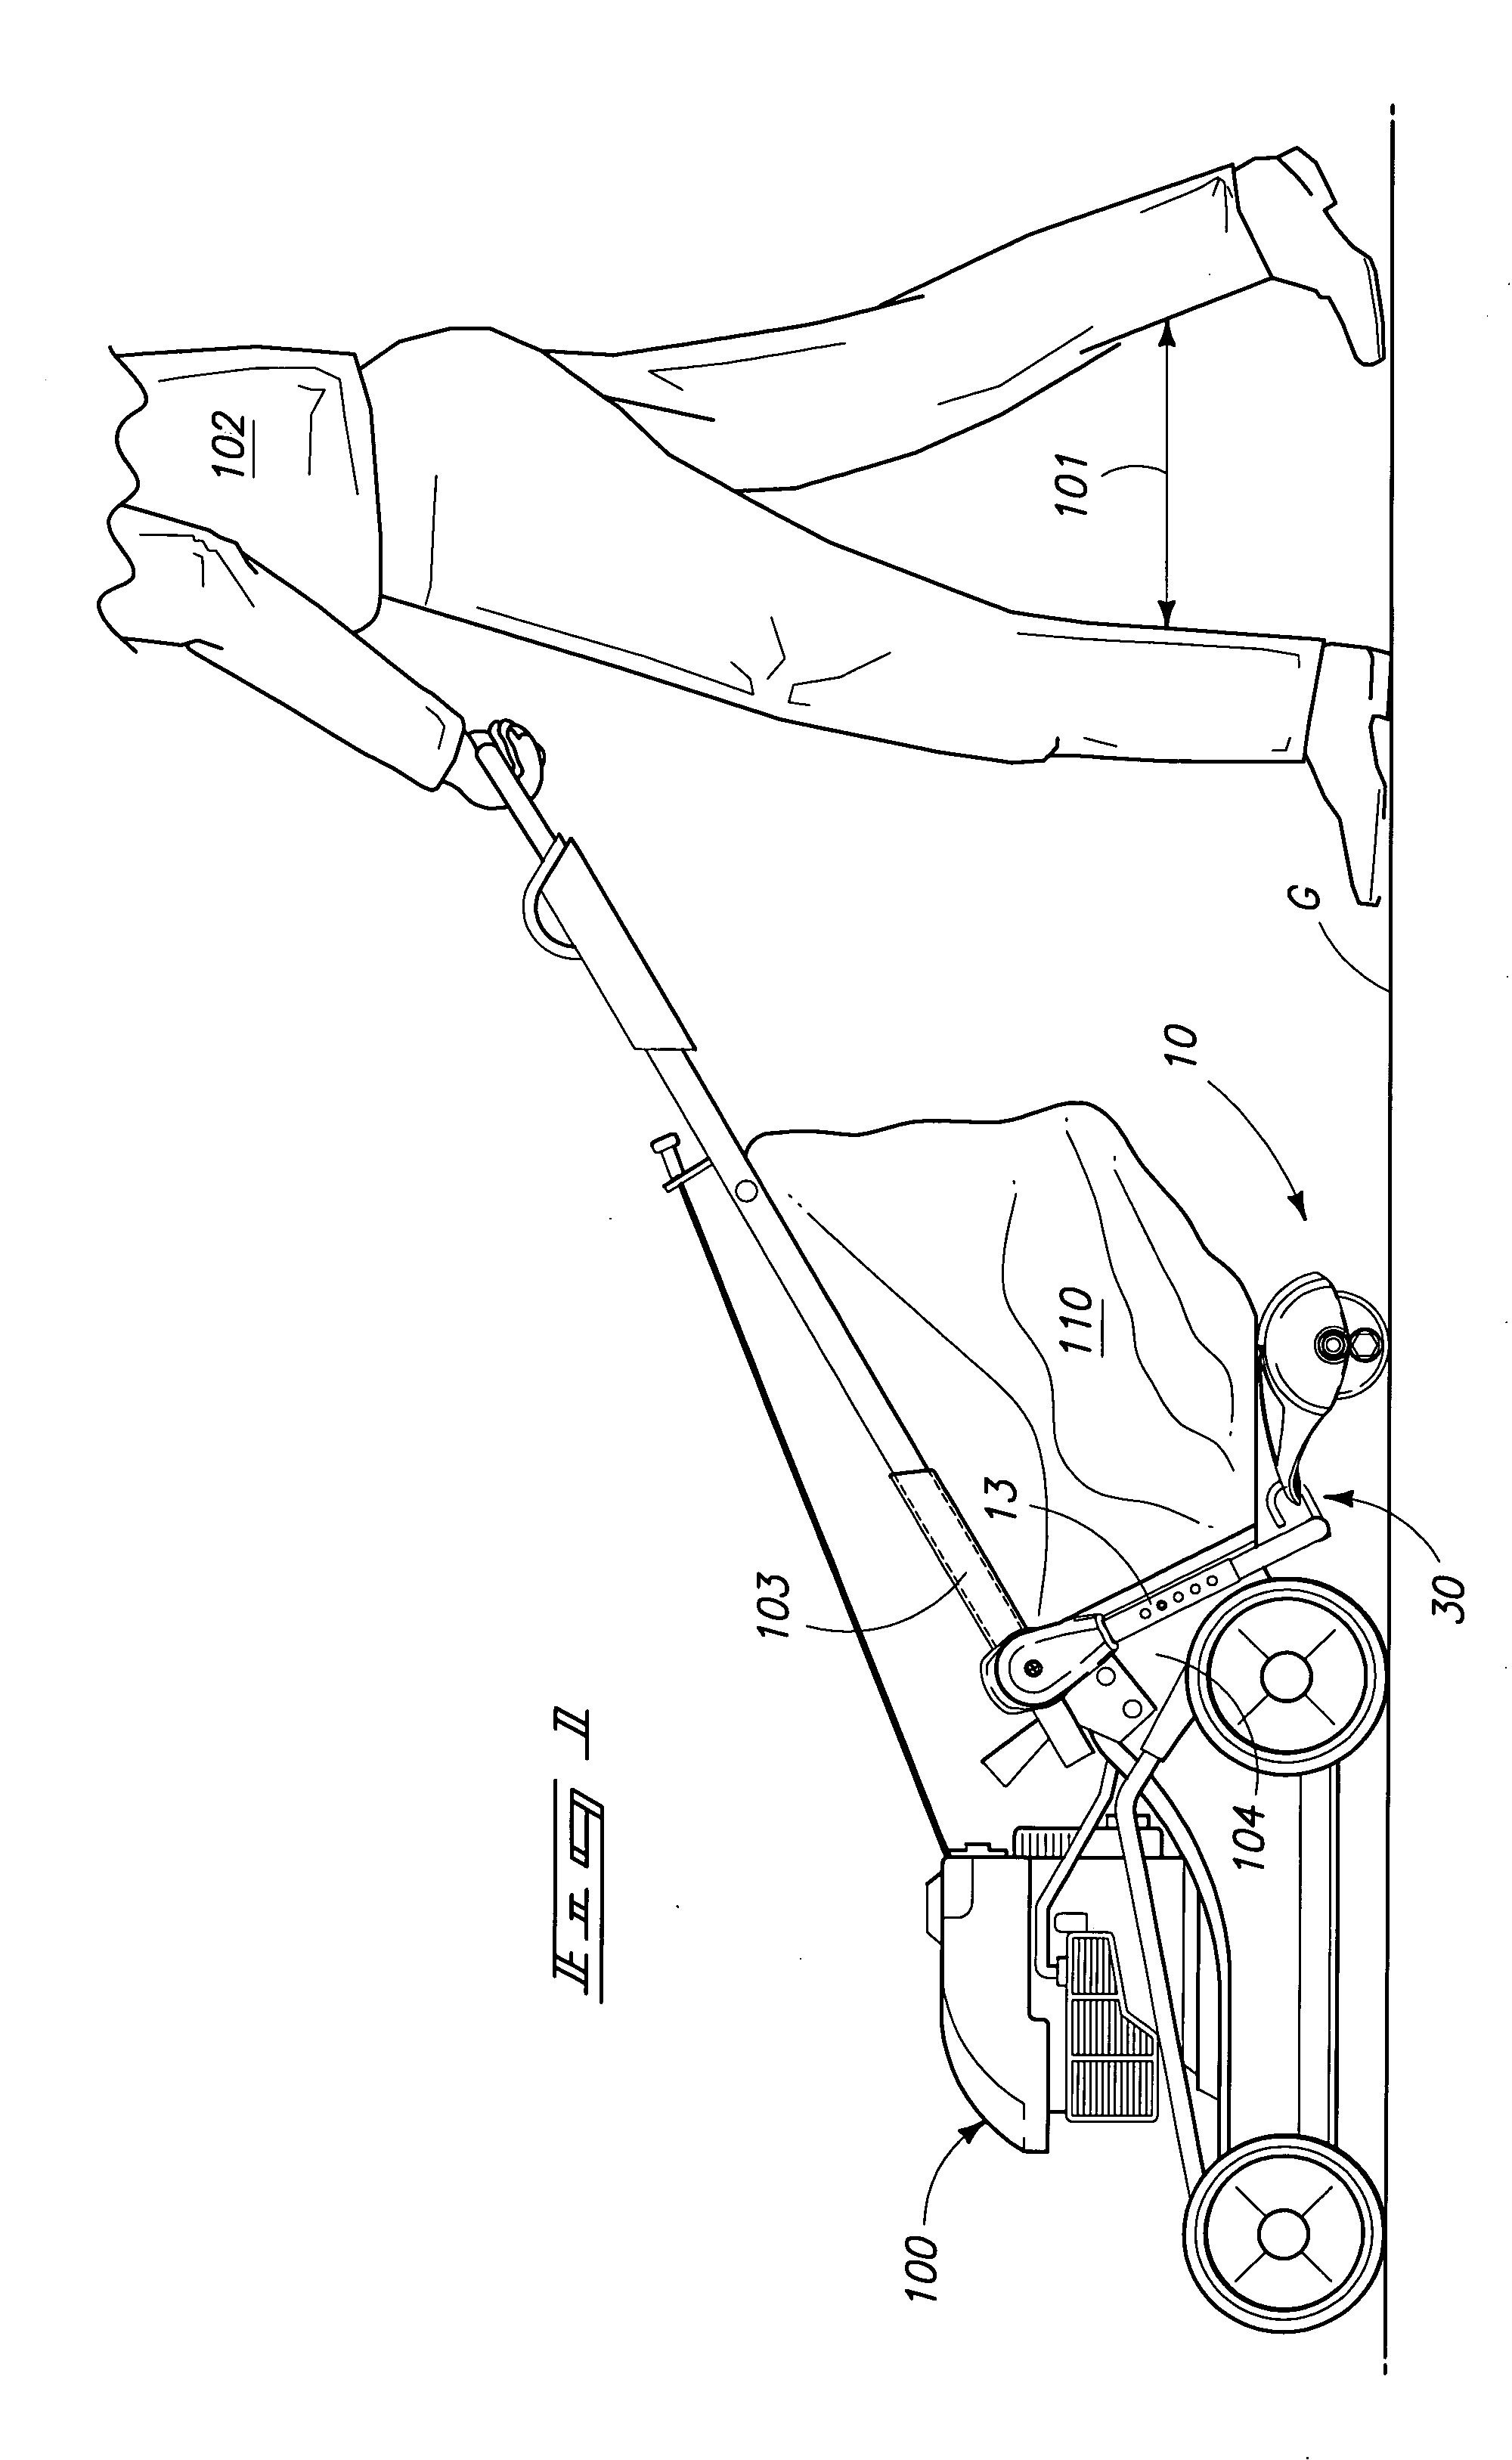 Lawn stripping assembly